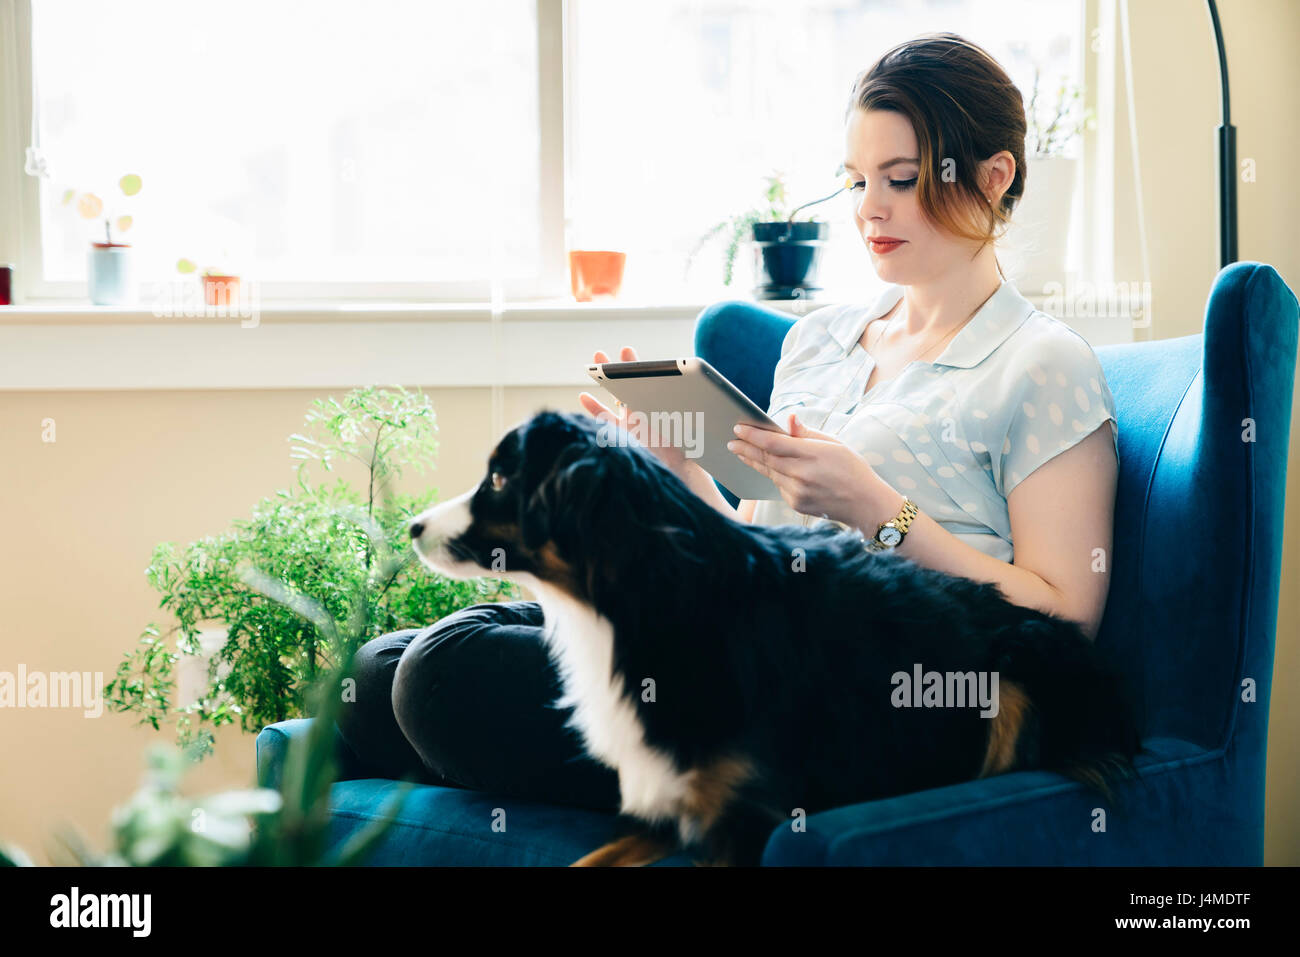 Woman sitting in armchair with dog using digital tablet Stock Photo